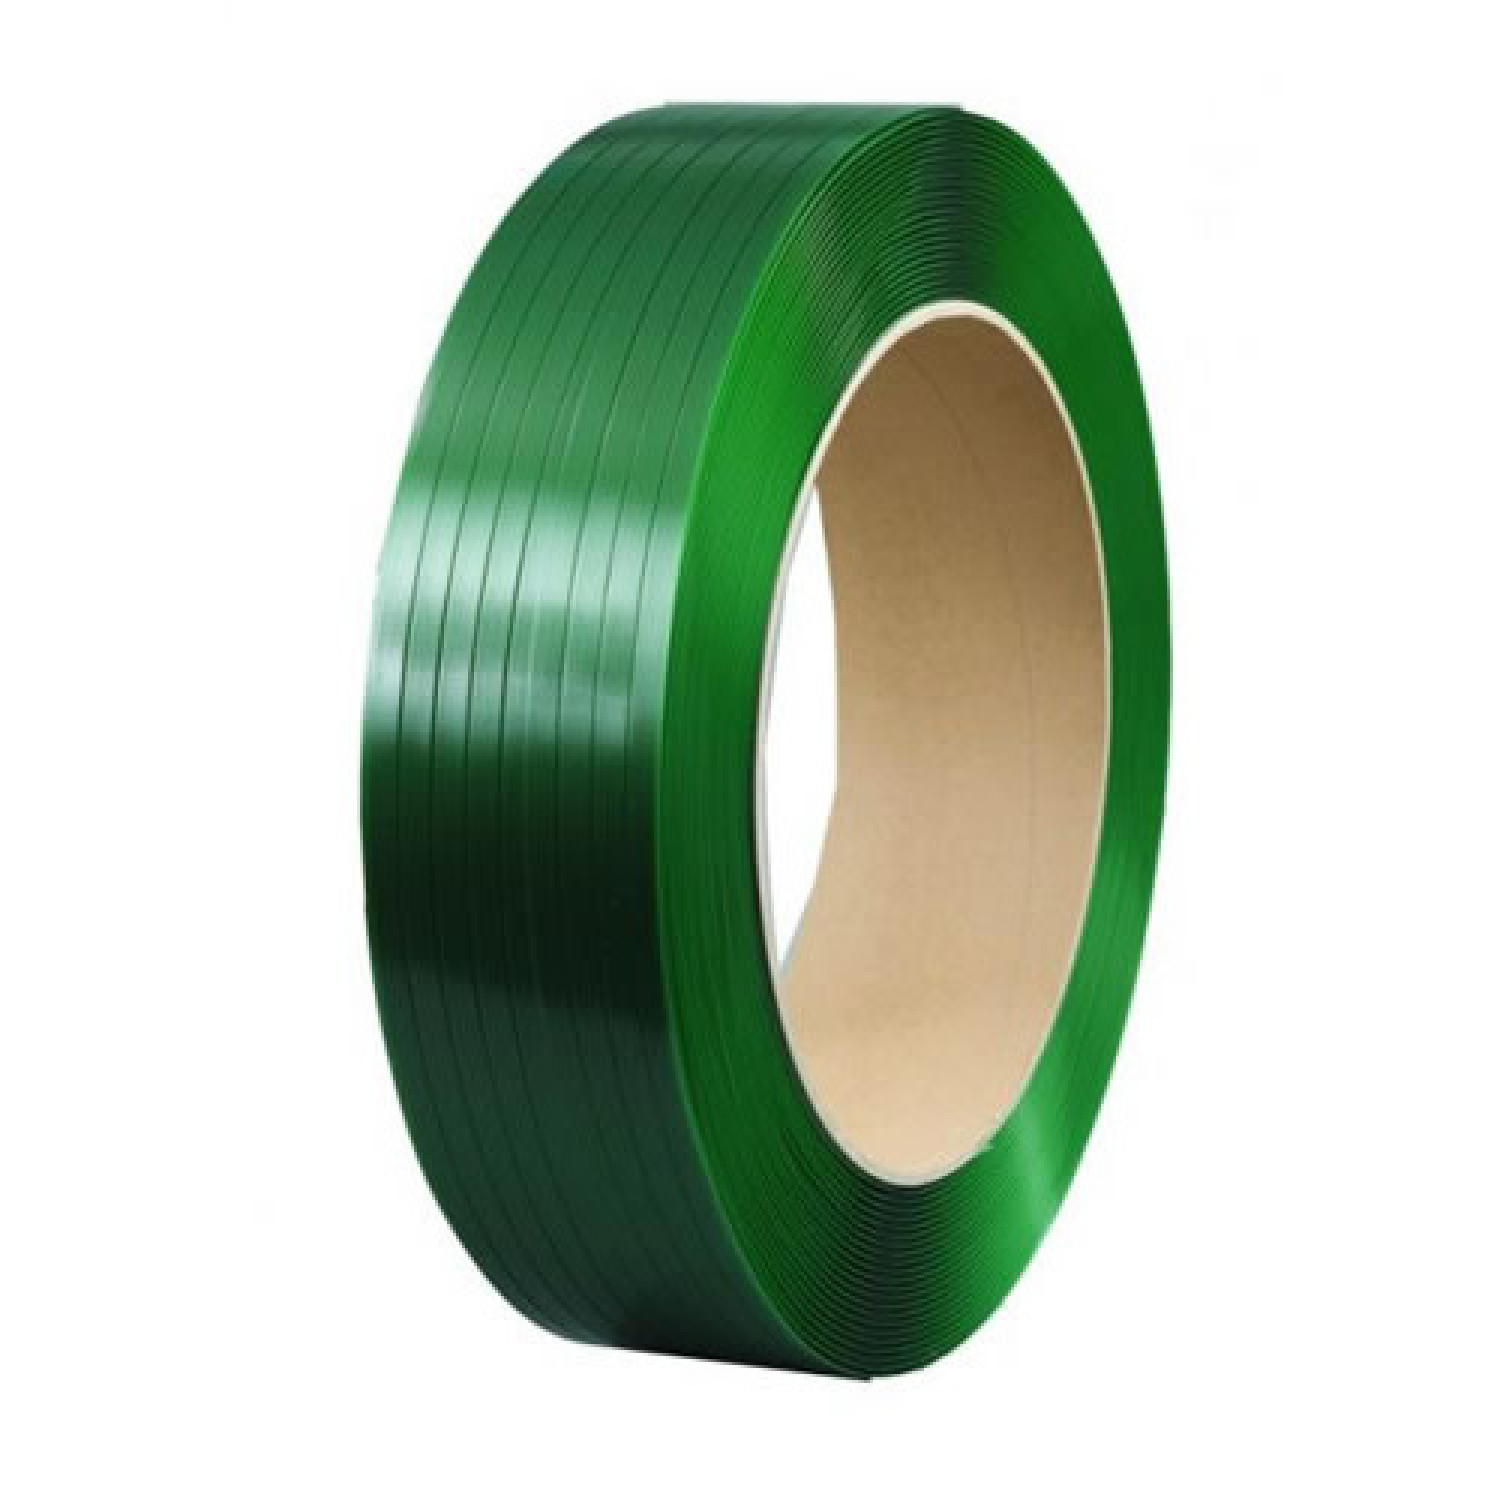 Storage Standard Heavy Duty Packaging Strapping Banding Roll - Green Polyester Pet Industrial-Grade, 1000' x 5/8 x 0.035 Pallet Strap Coil - 1400